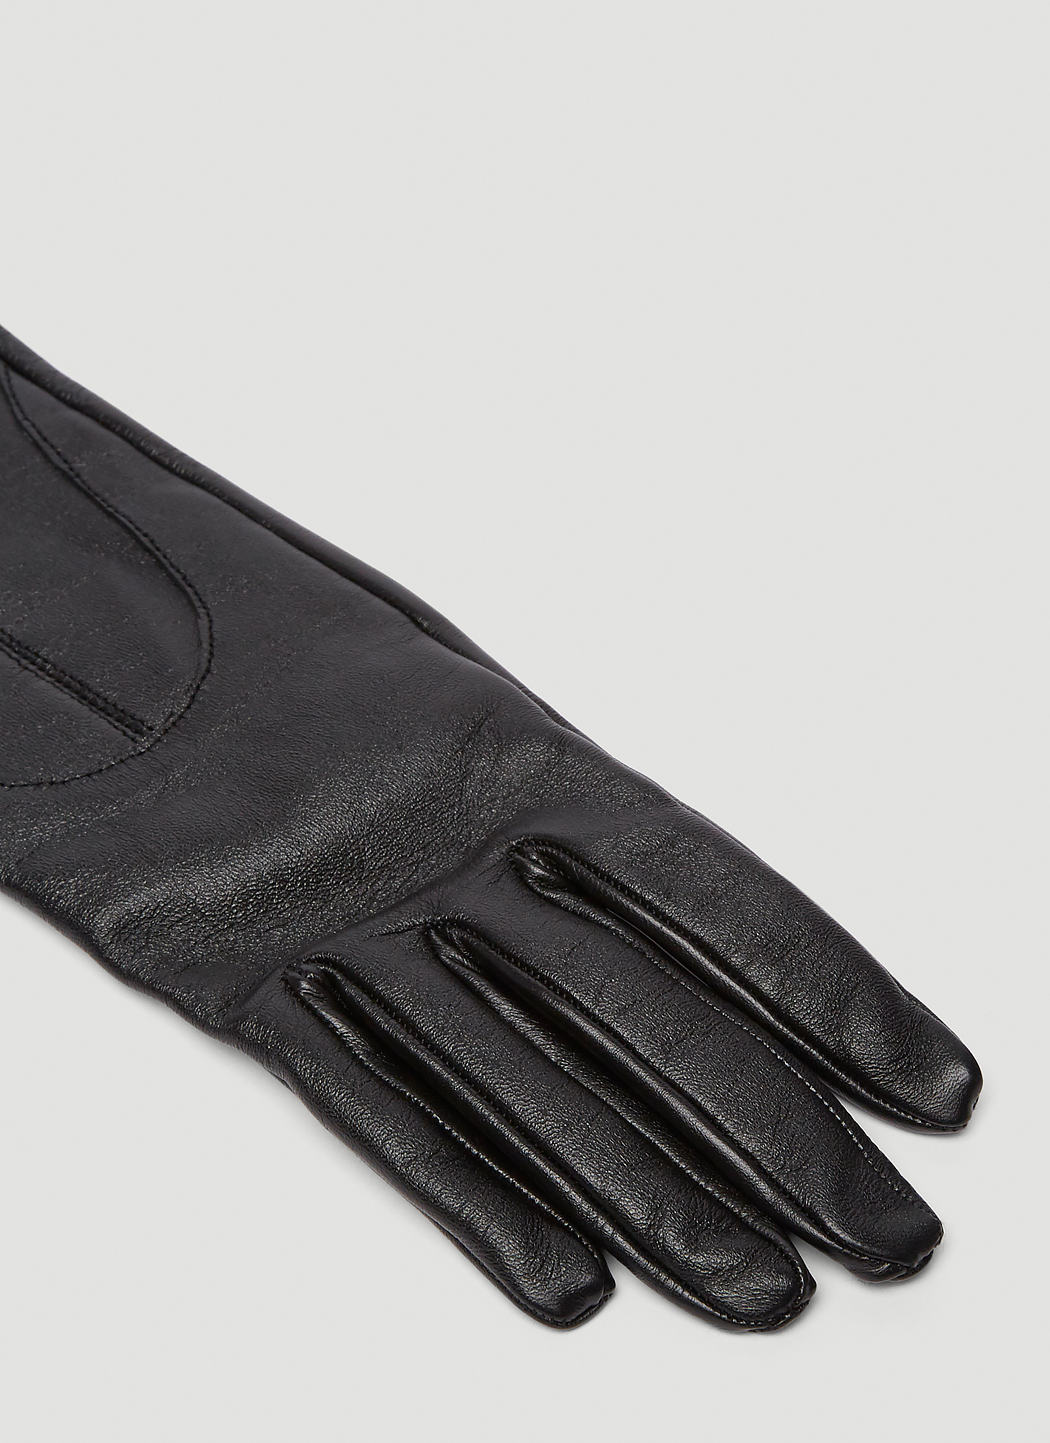 Marni Long Leather Gloves in Black | LN-CC